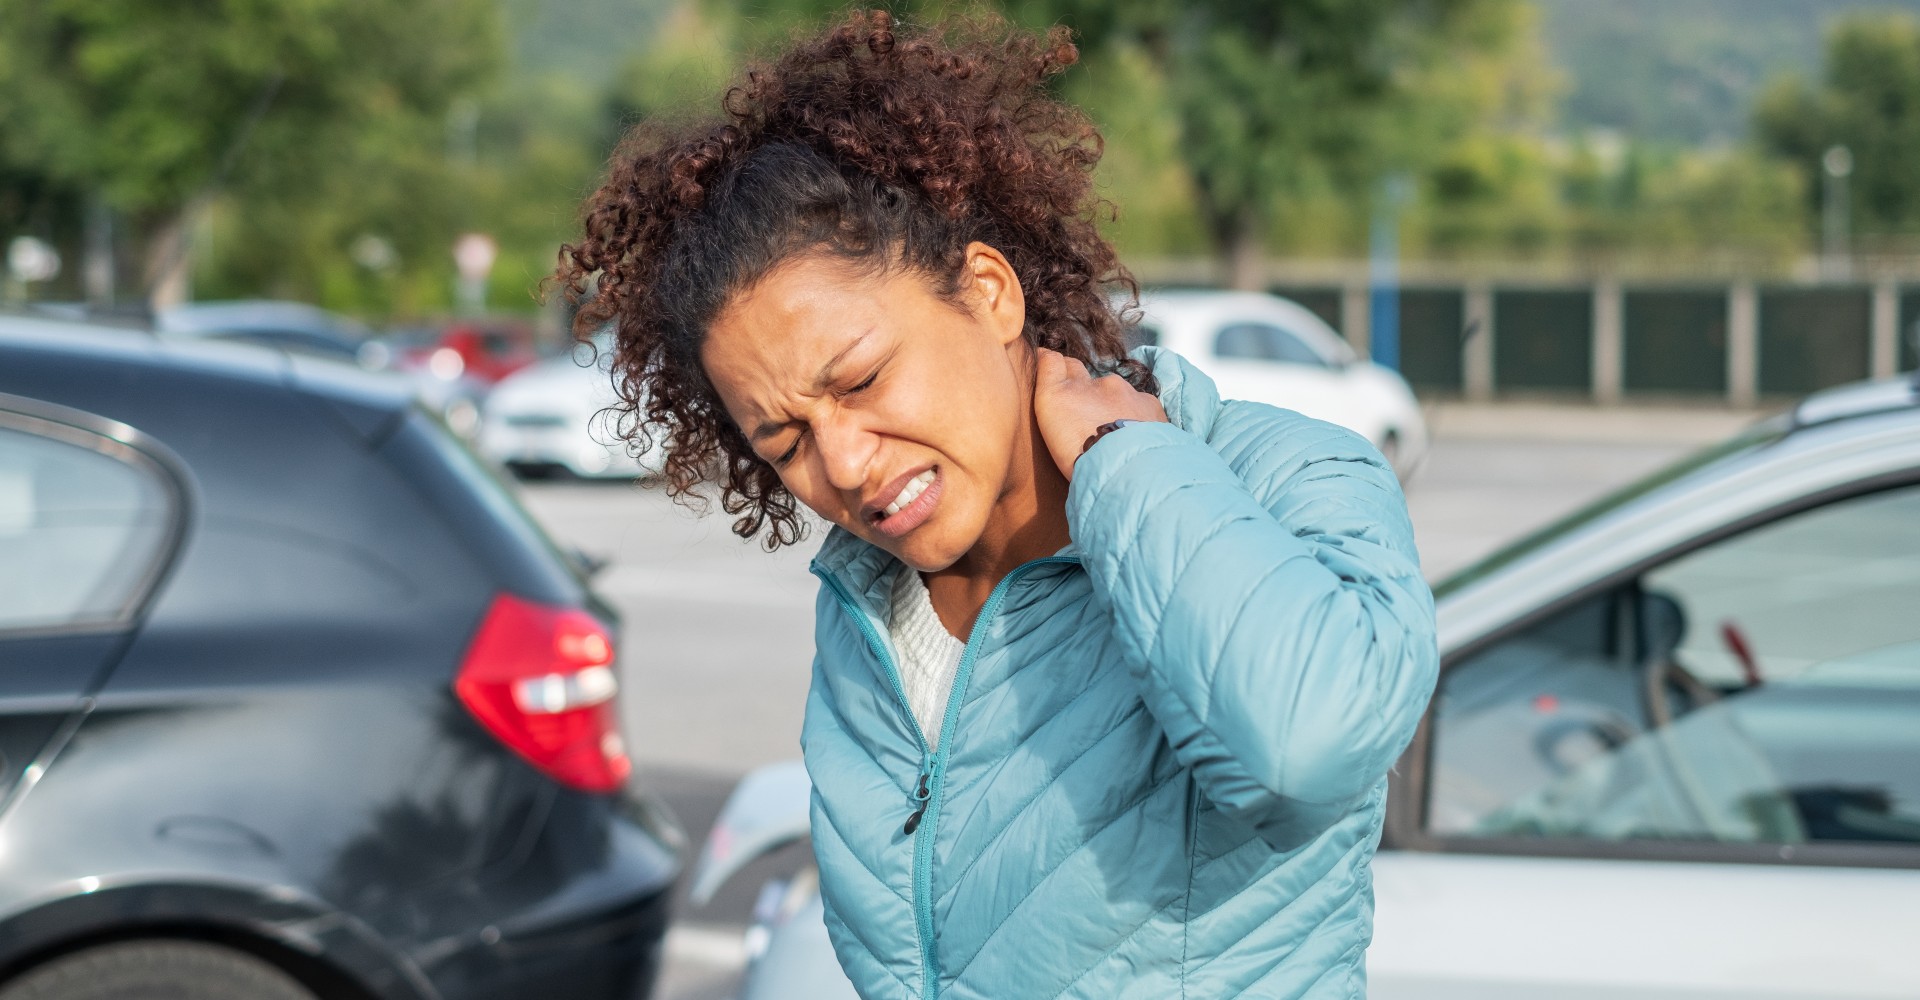 Woman in teal jacket clutching neck in pain